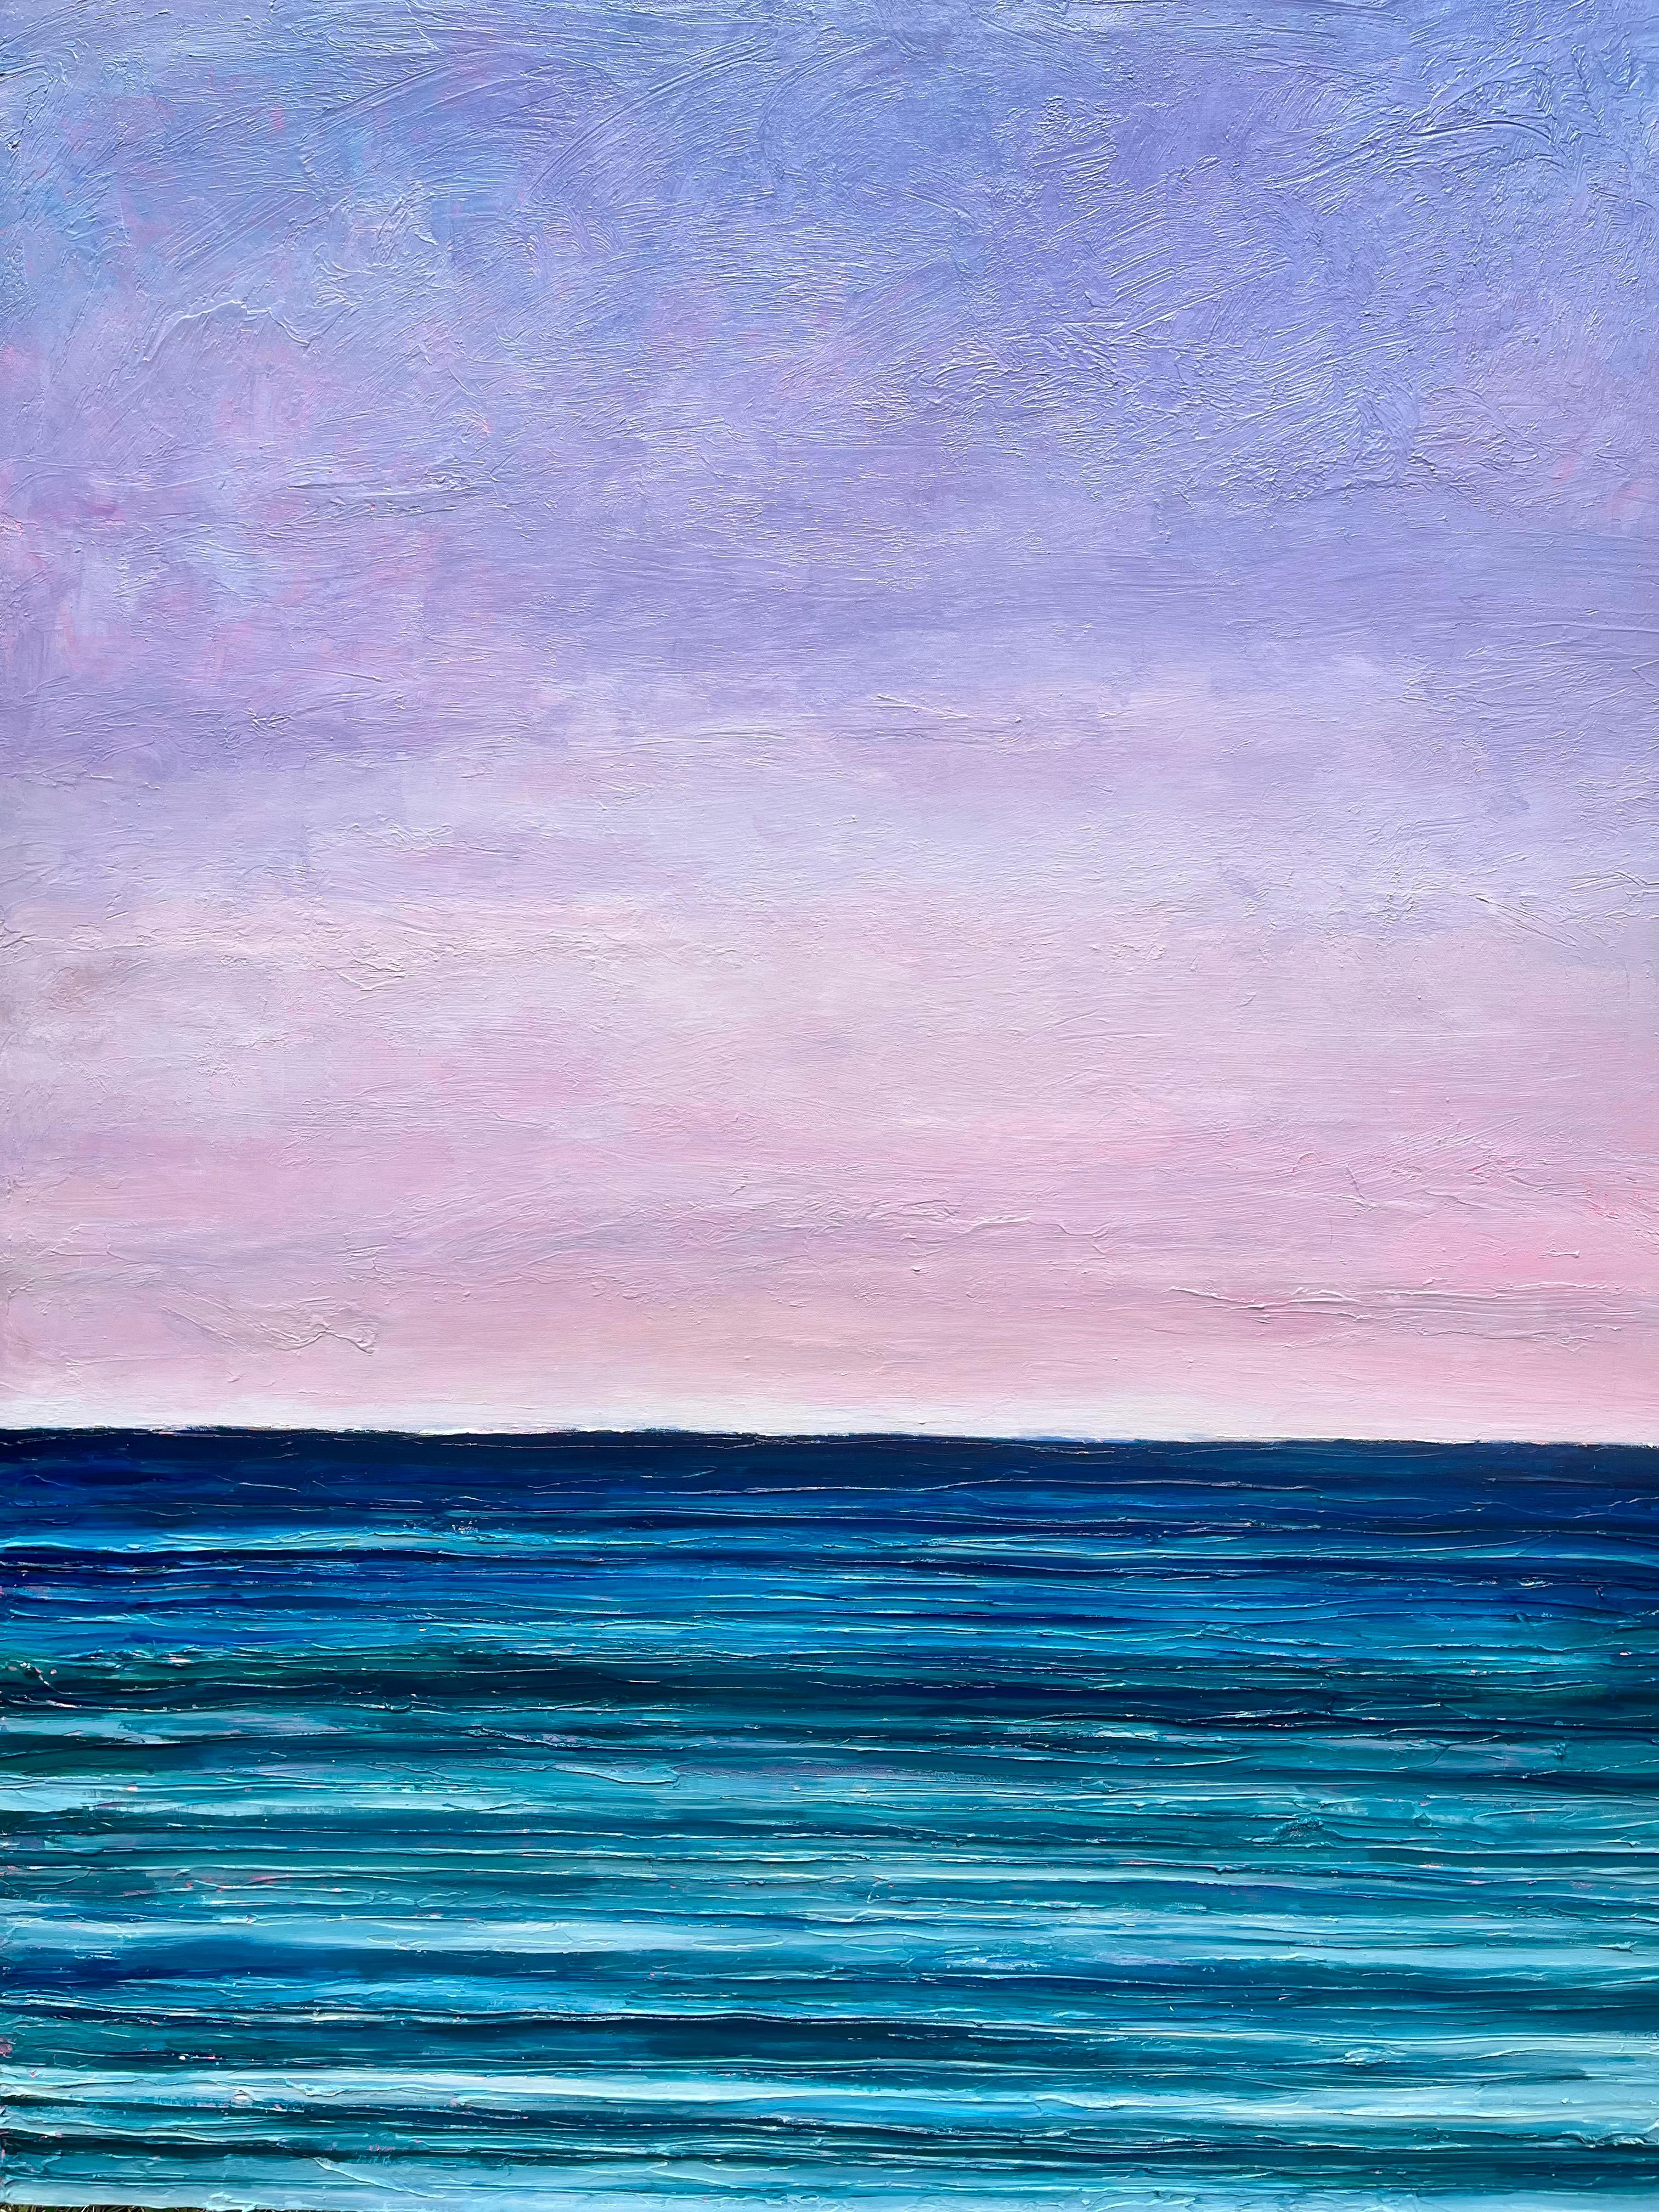 <p>Artist Comments<br>Artist Nava Lundy paints a tranquil seascape with minimal representation. She layers rich textures, creating a soft gradation of lavender and pink sky, complementing the water's deep blues and bright teals. Gentle ripples ebb